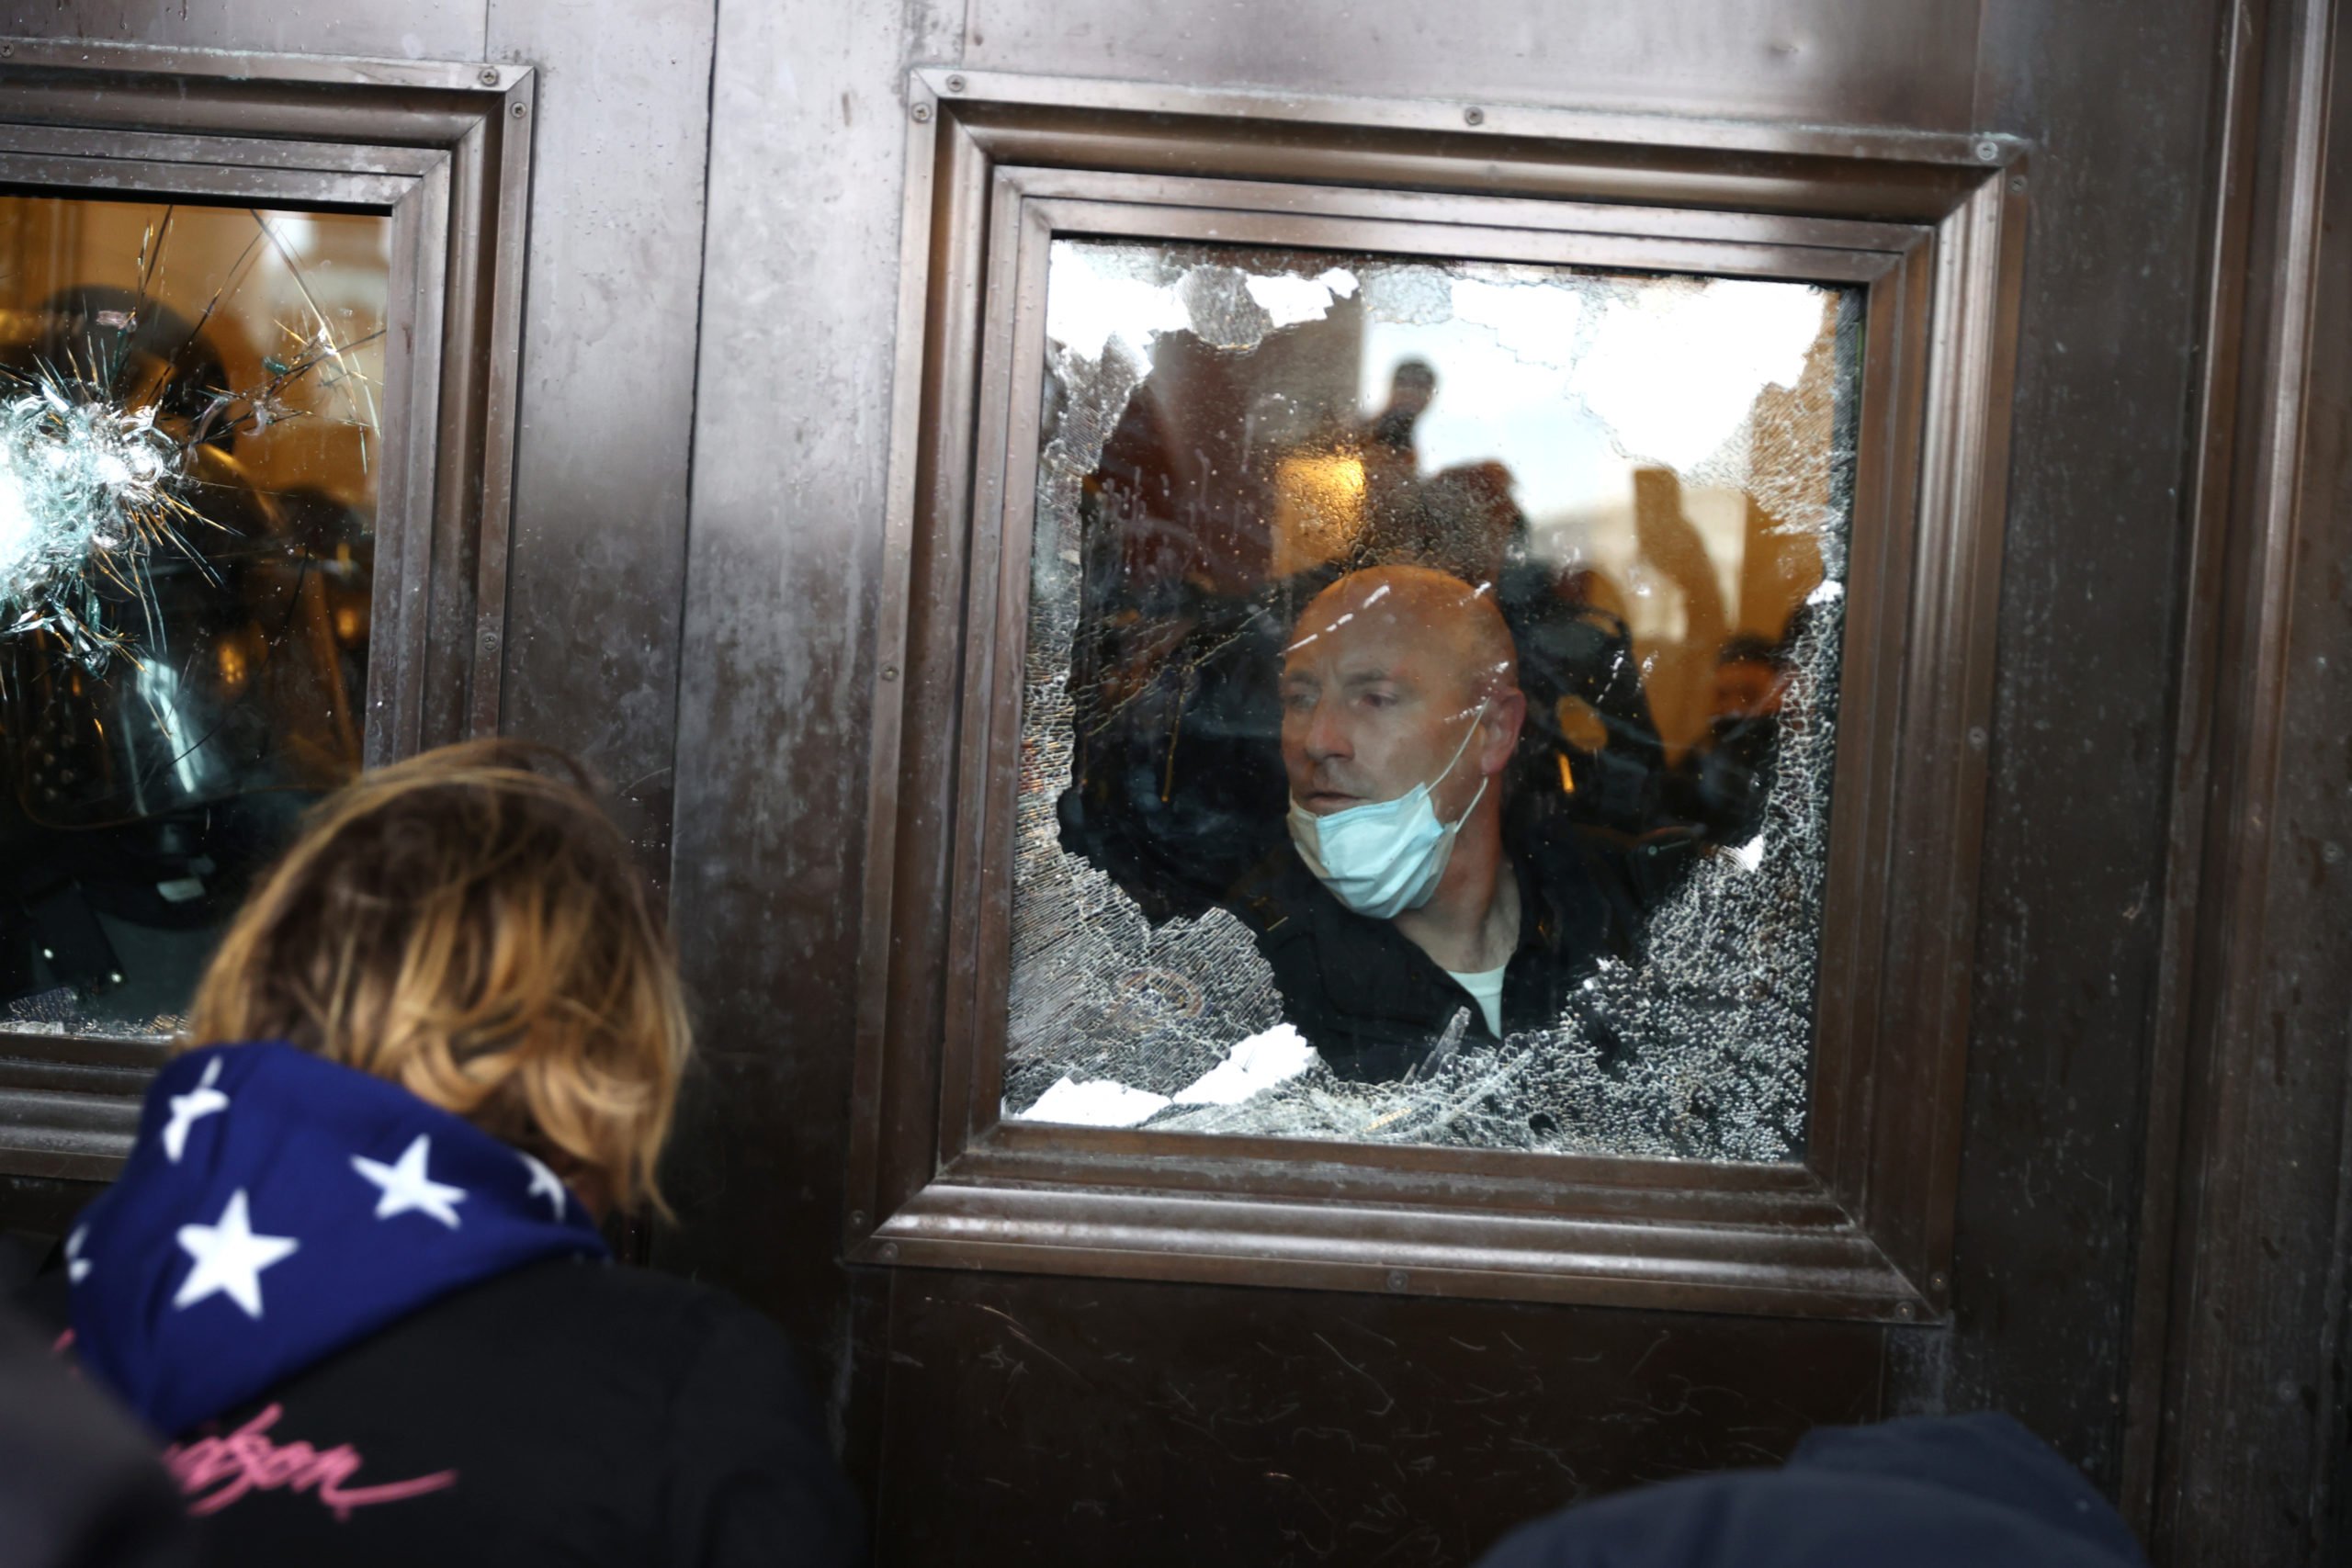 A Capitol police officer looks out of a broken window as protesters gather on the U.S. Capitol Building on January 06, 2021 in Washington, DC. (Tasos Katopodis/Getty Images)